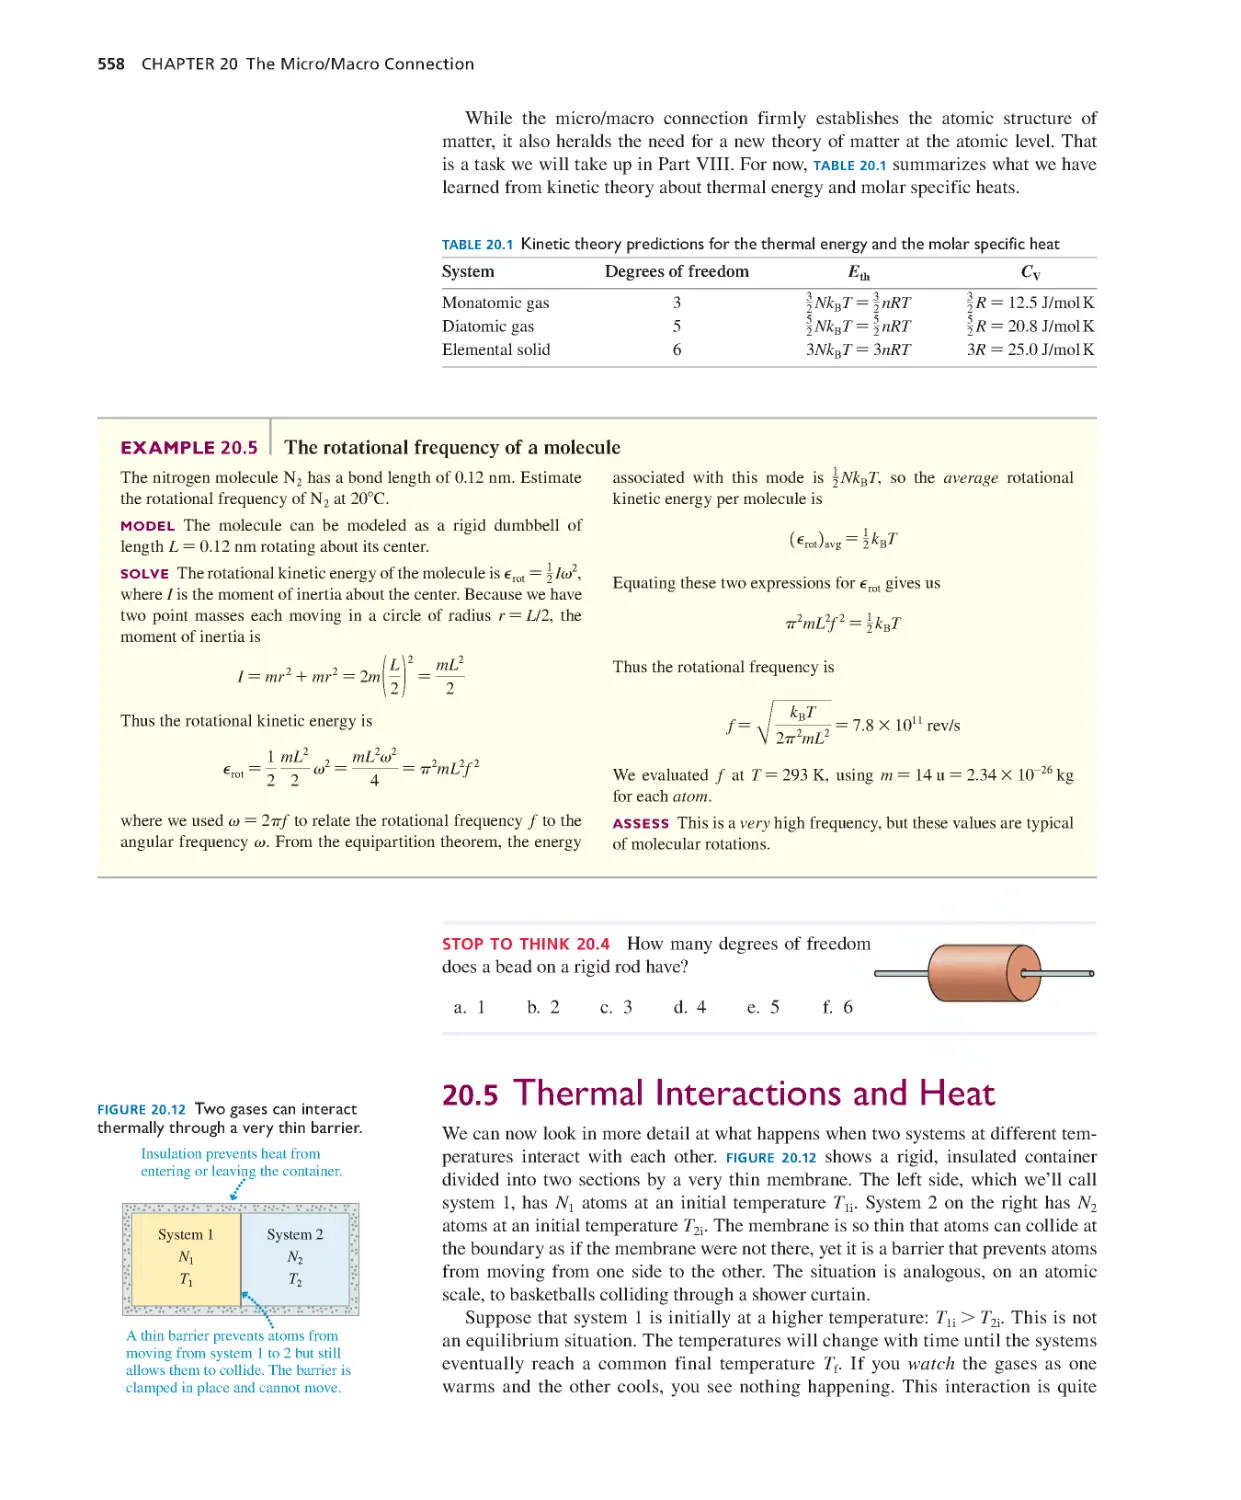 20.5. Thermal Interactions and Heat